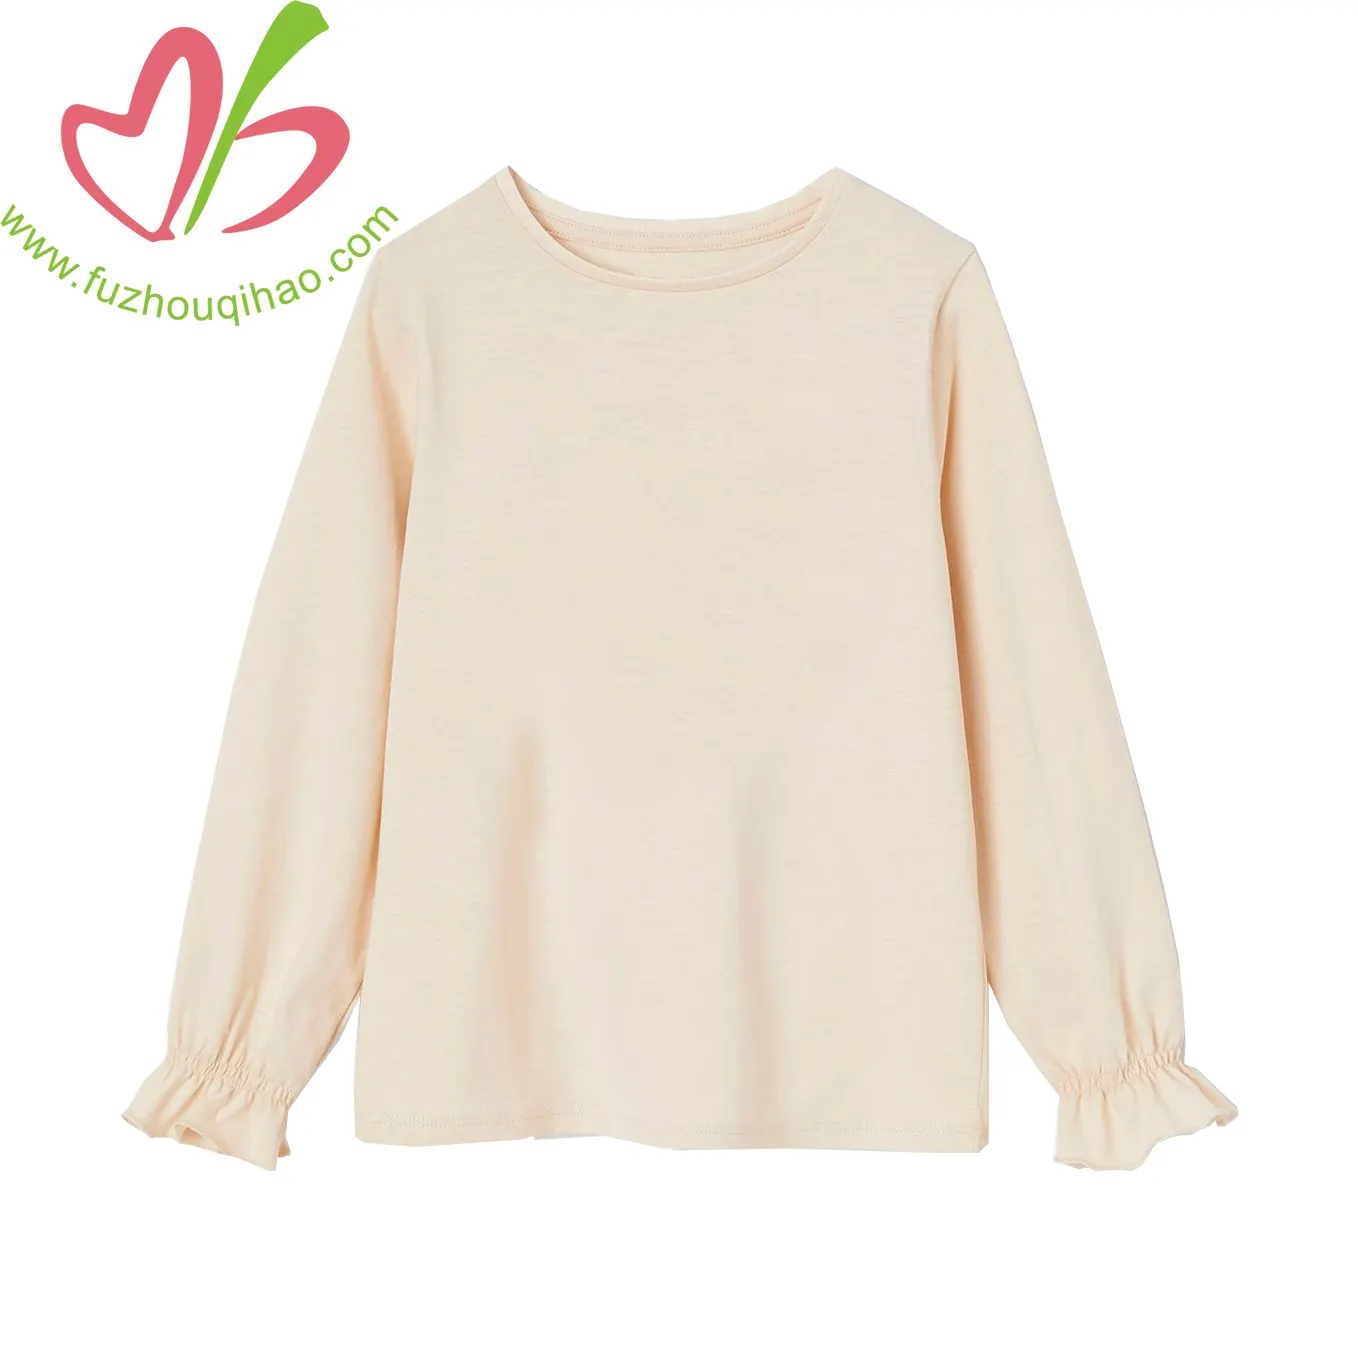 Customized Long Ruffle Sleeves Blank Solid T-shirt Top for Girls with/without Applique or Printing